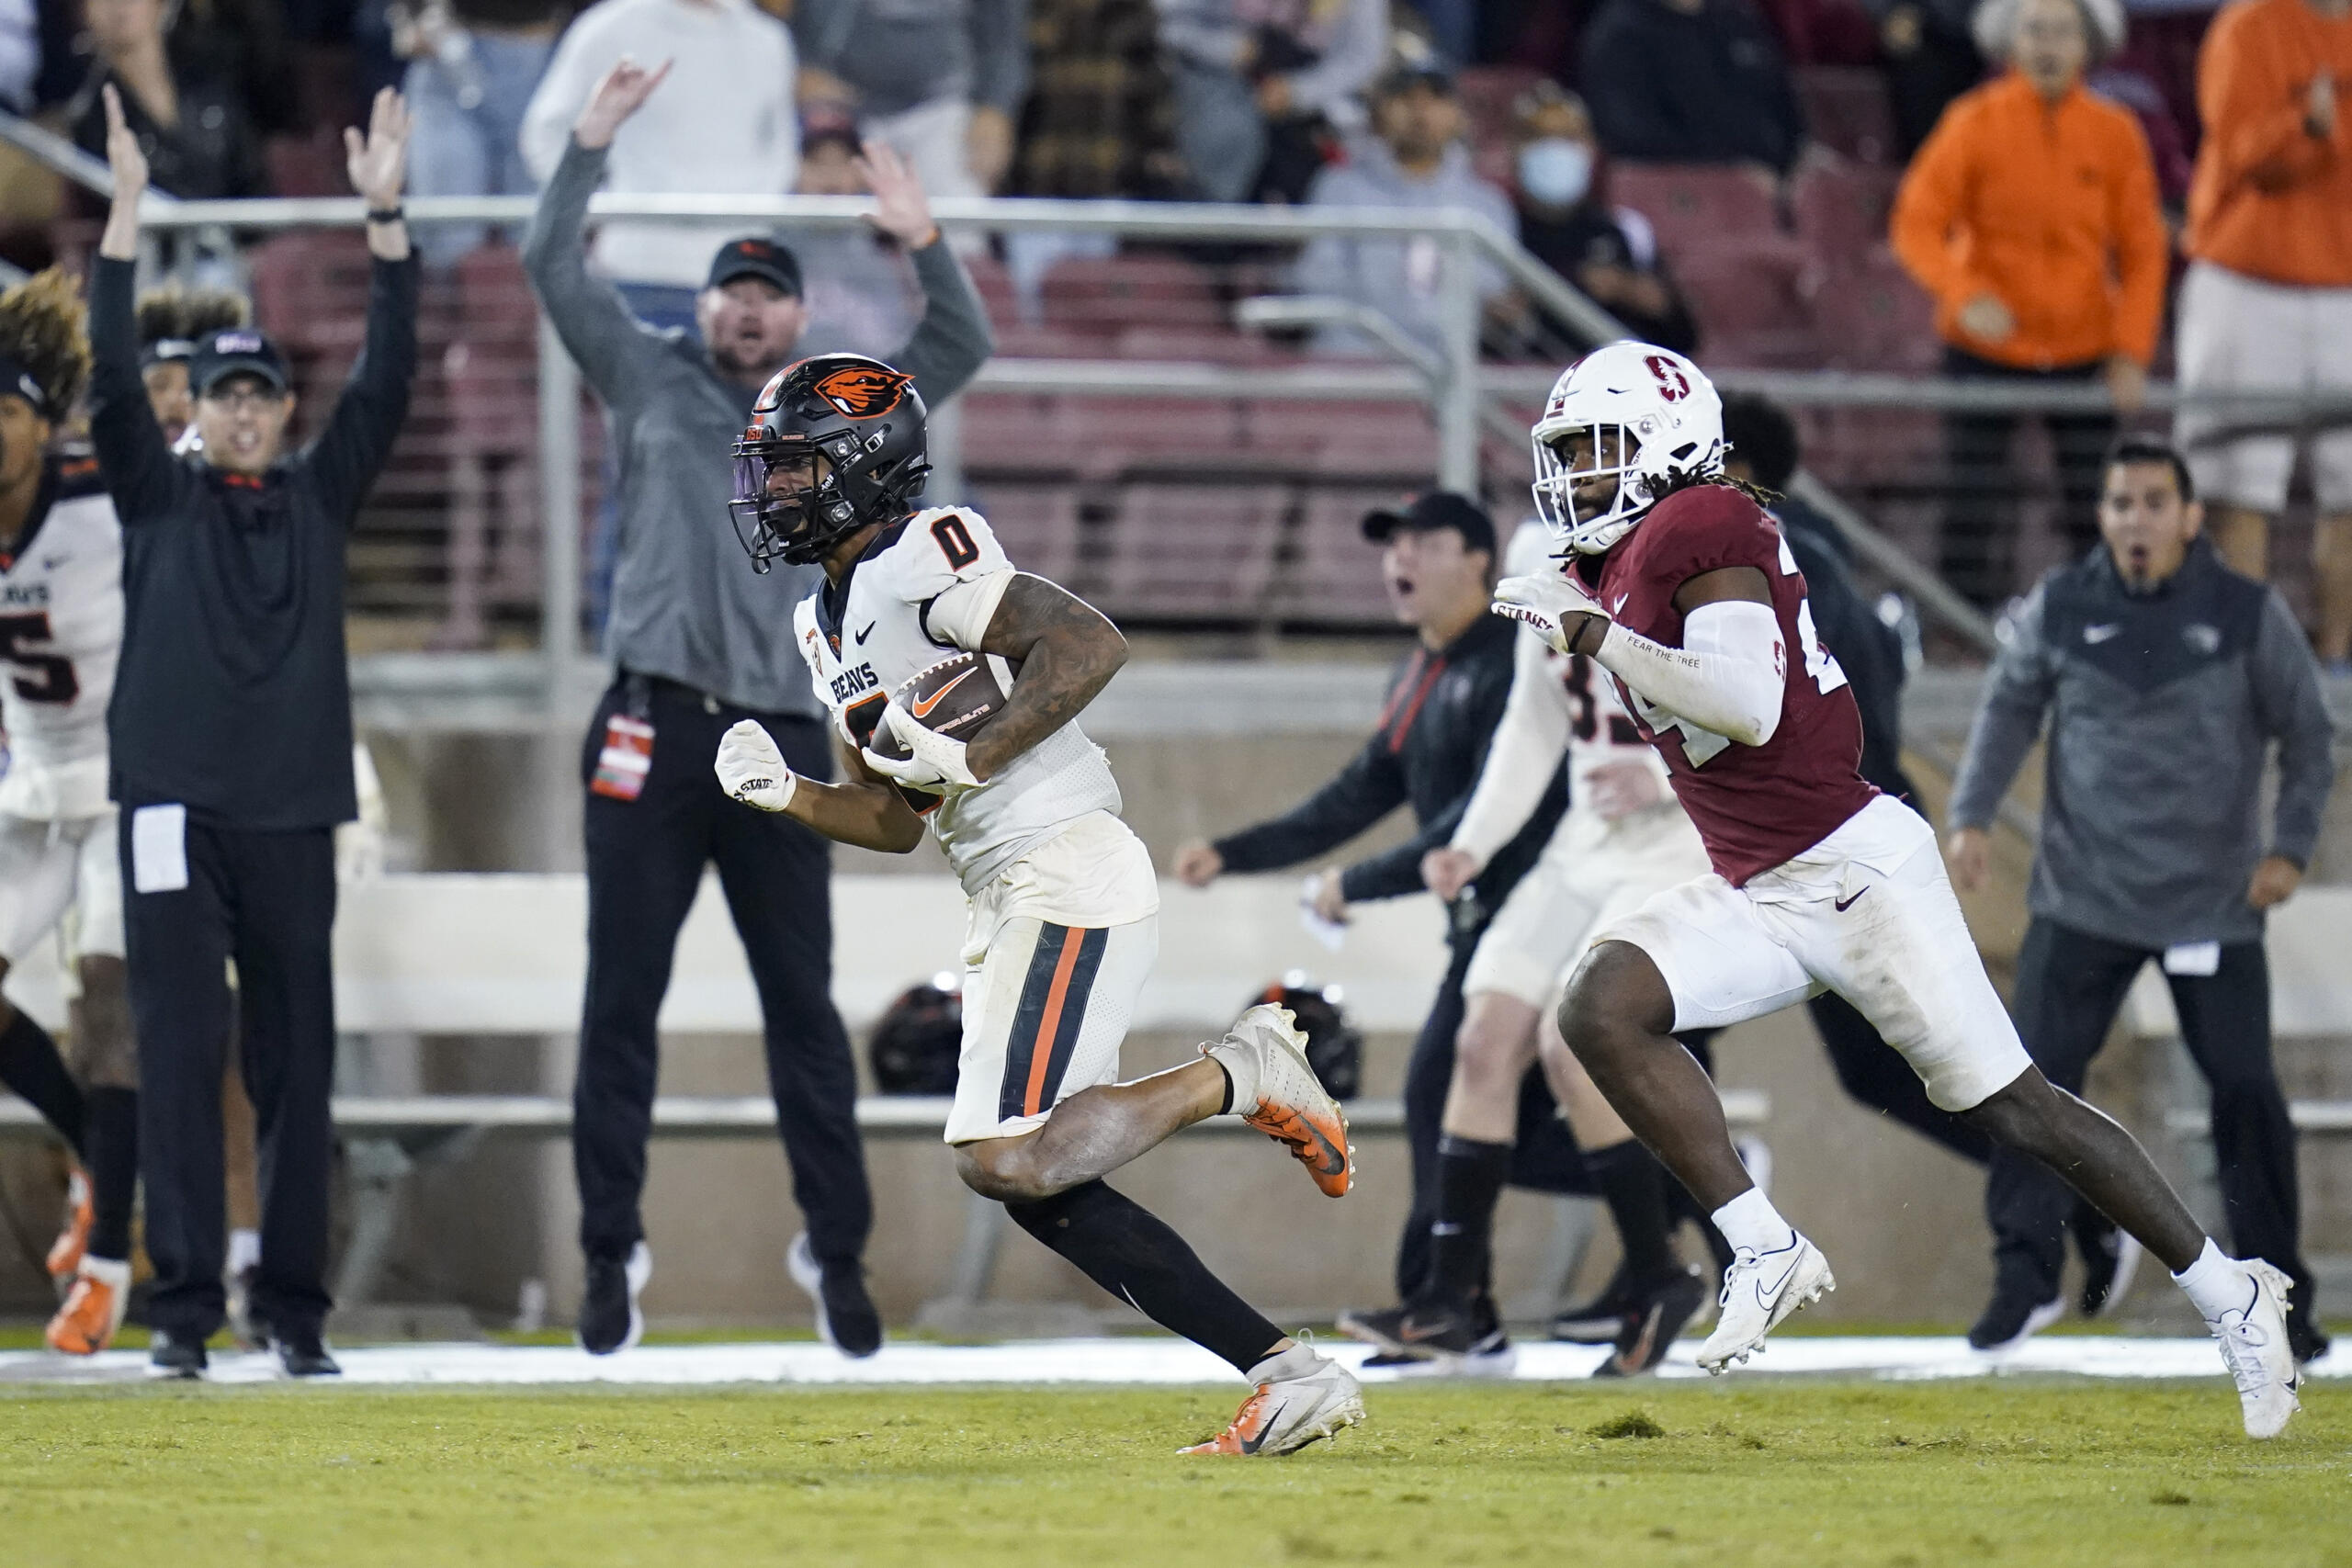 Oregon State wide receiver Tre'Shaun Harrison (0) runs after a catch for a 56-yard touchdown against Stanford during the second half of an NCAA college football game in Stanford, Calif., Saturday, Oct. 8, 2022. Oregon State won 28-27. (AP Photo/Godofredo A.